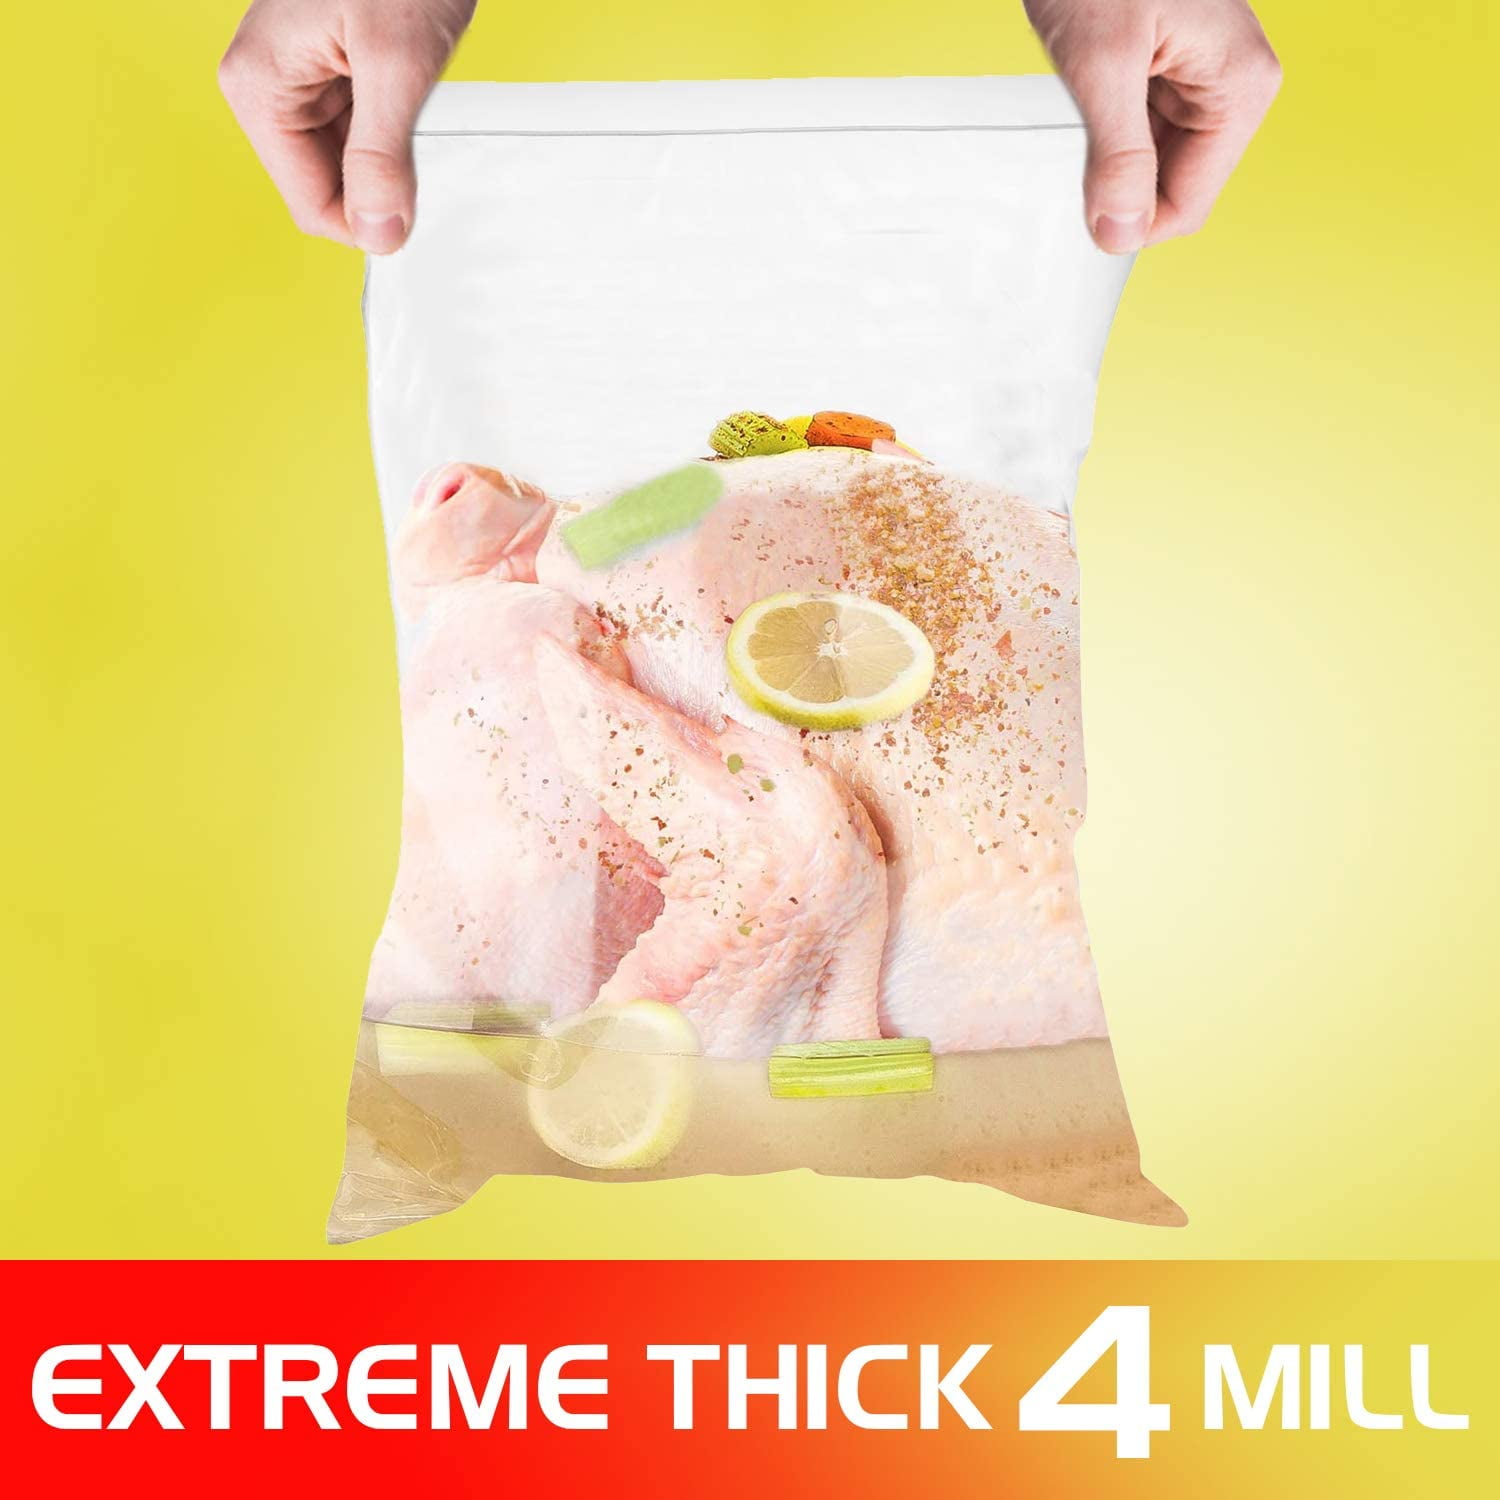  [ 10 COUNT ] - 3 MILL - Extreme THICK Extra Large Super  Spacious Strong CLEAR Big Bags, Perfect Resealable Brining Bag for Huge  Turkey Roast reclosable, 8 GALLON, 3 Mill